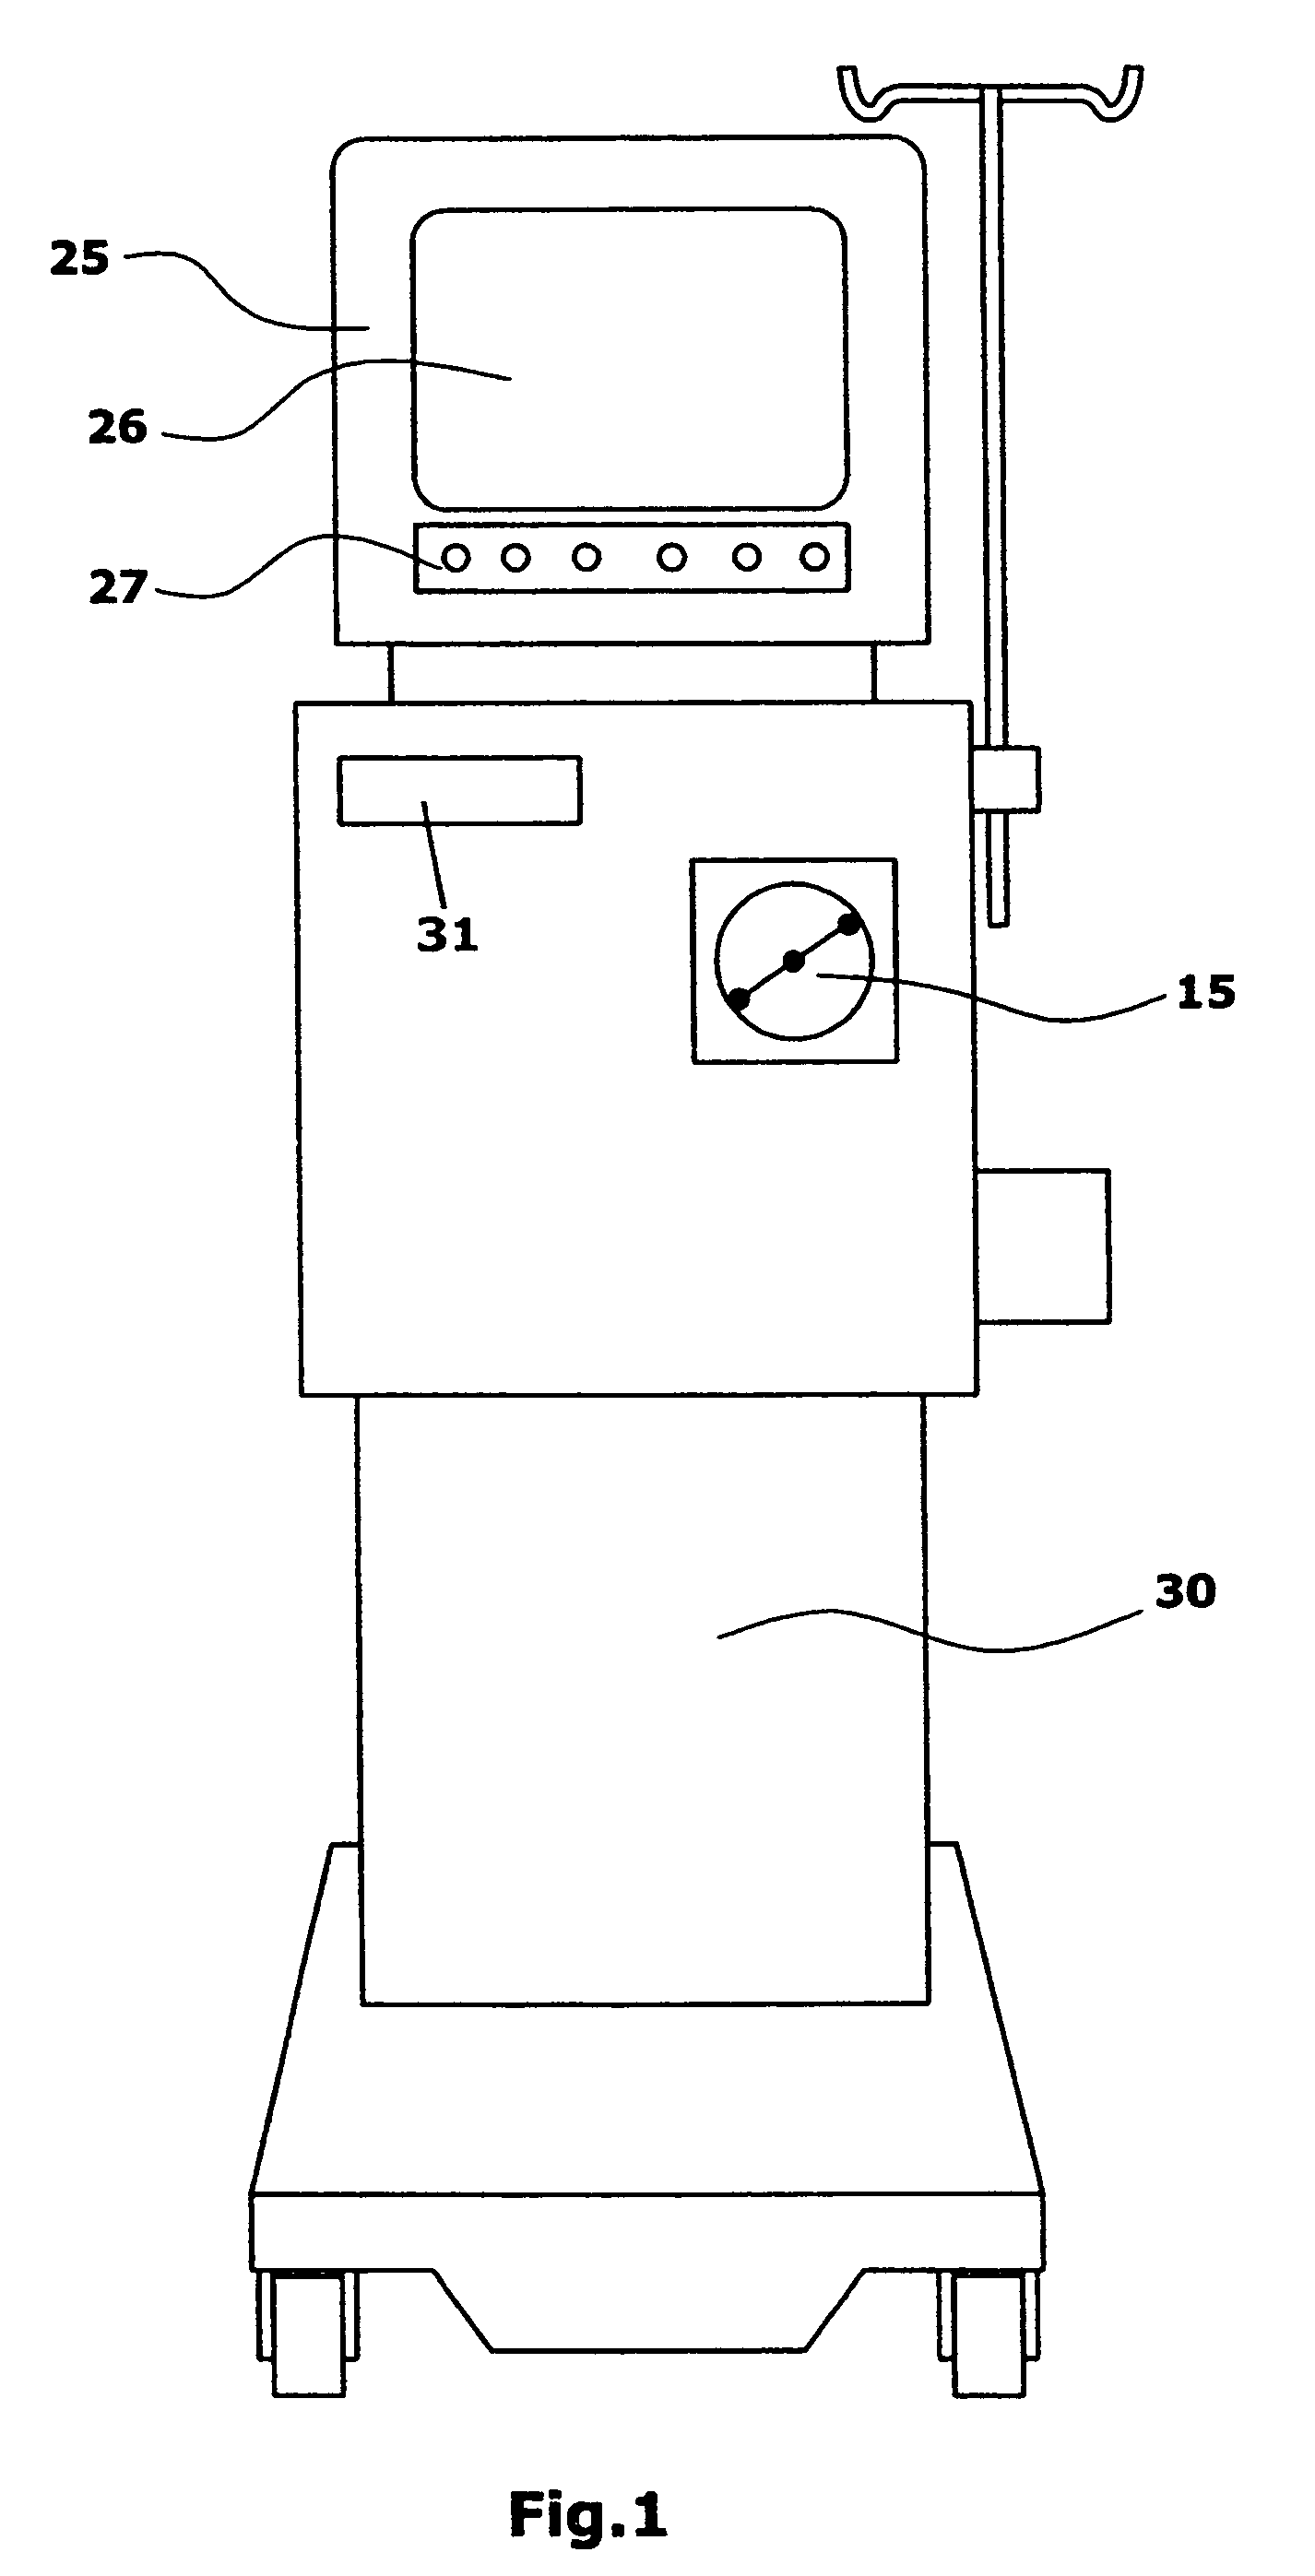 Blood treatment apparatus with alarm device